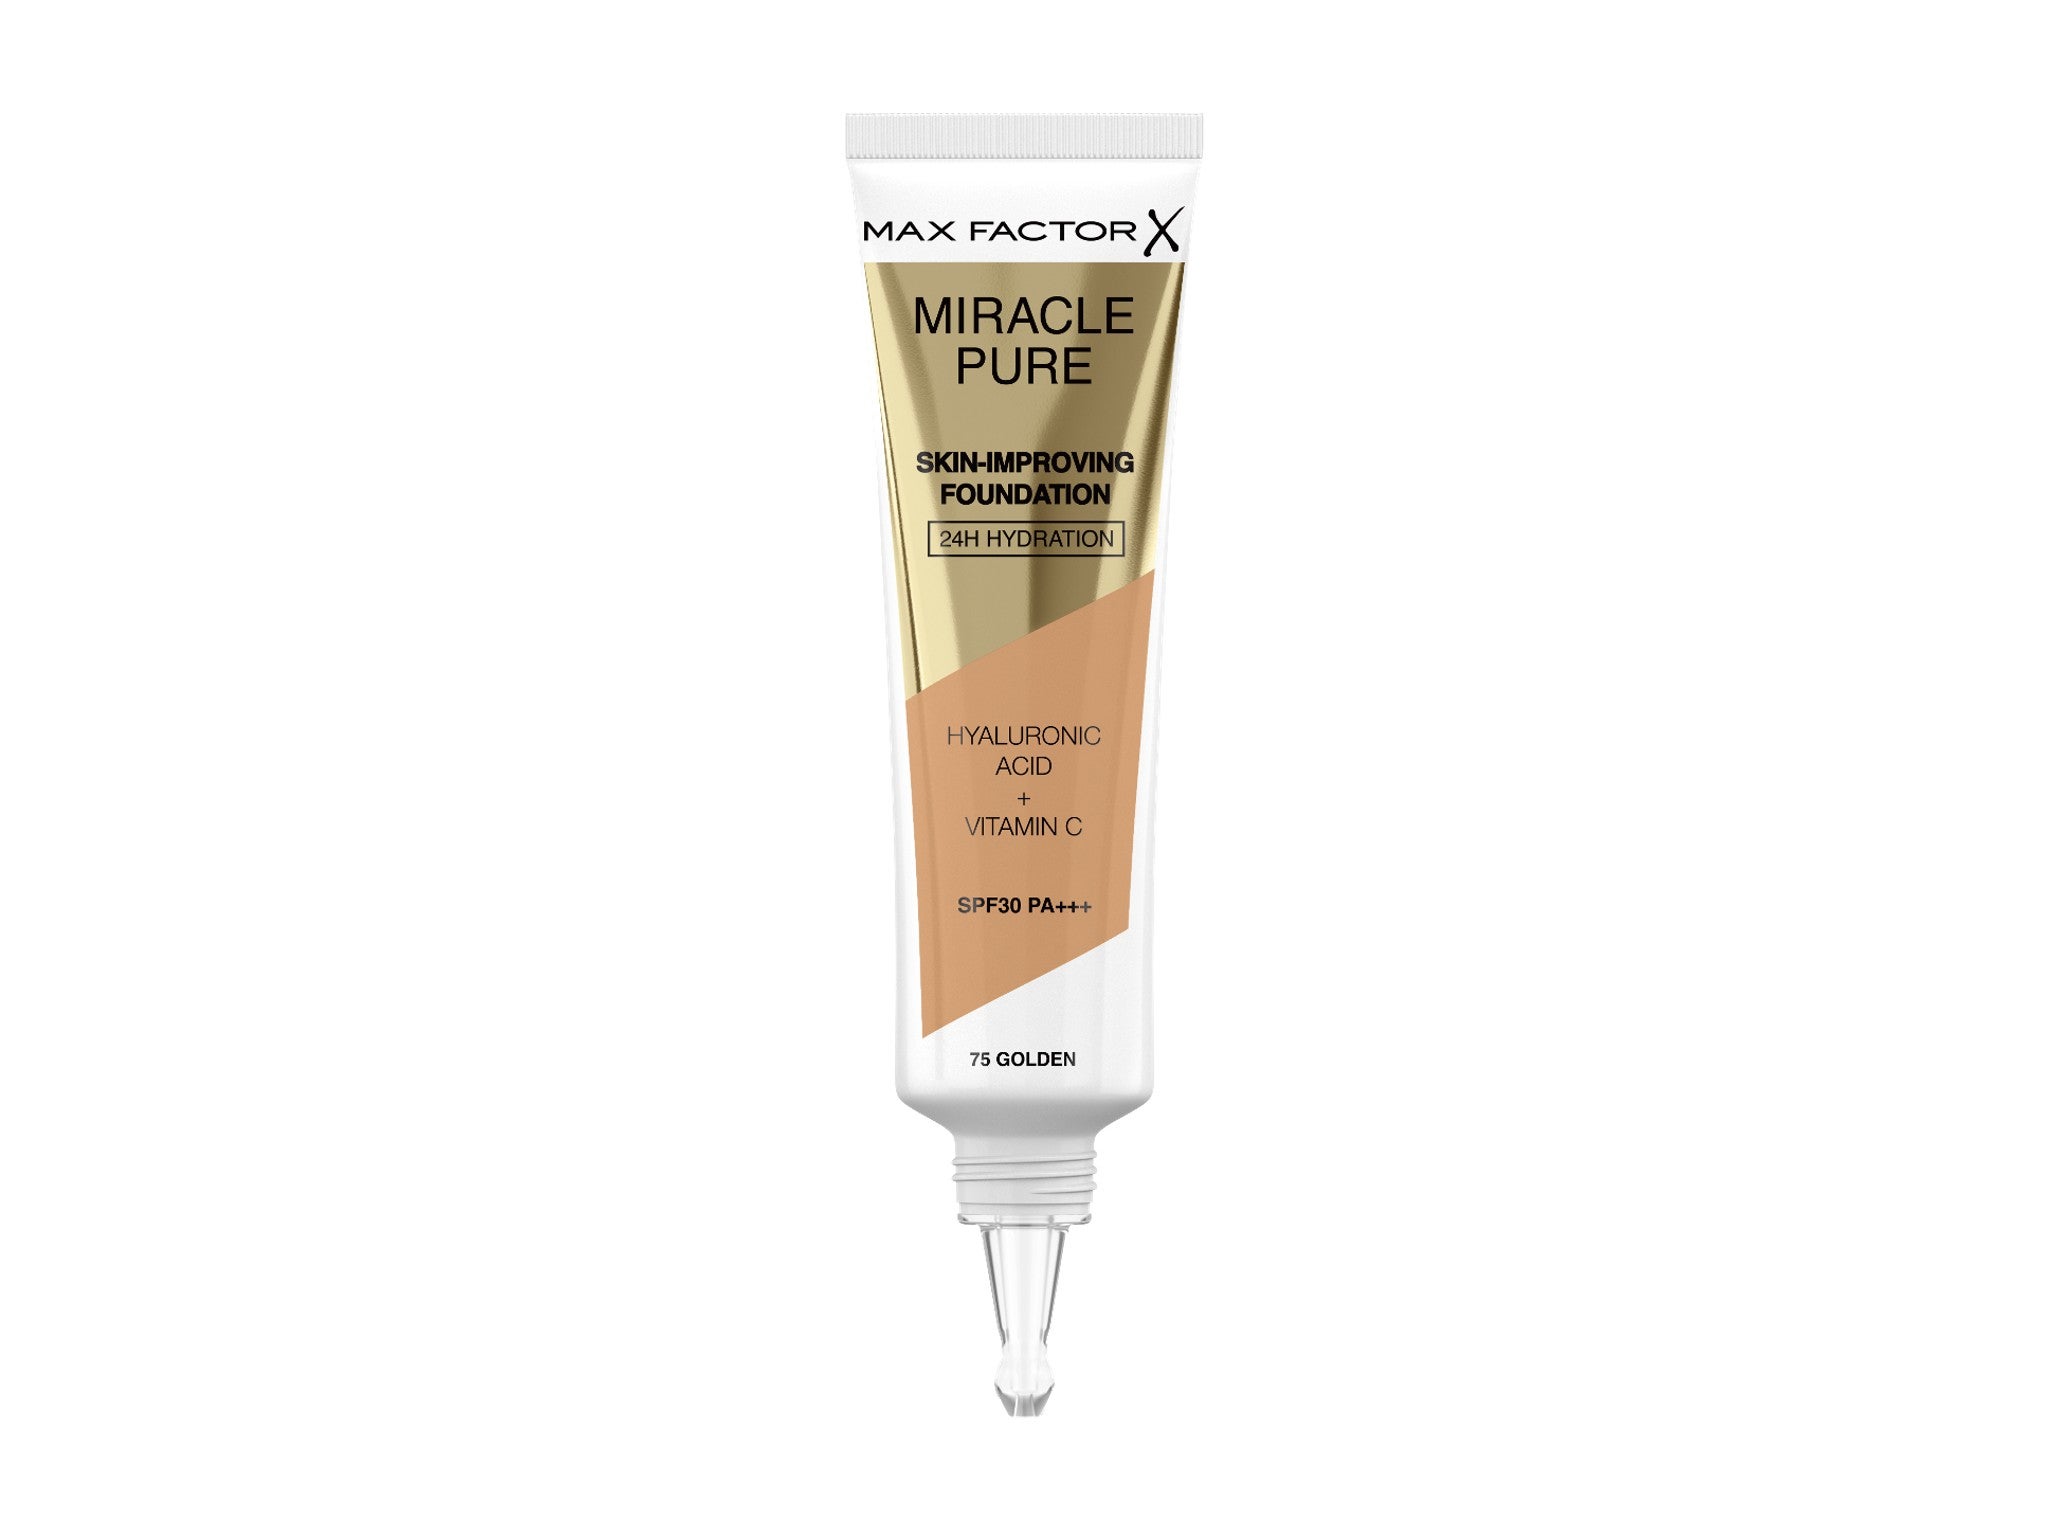 Max Factor miracle pure skin-improving foundation indybest